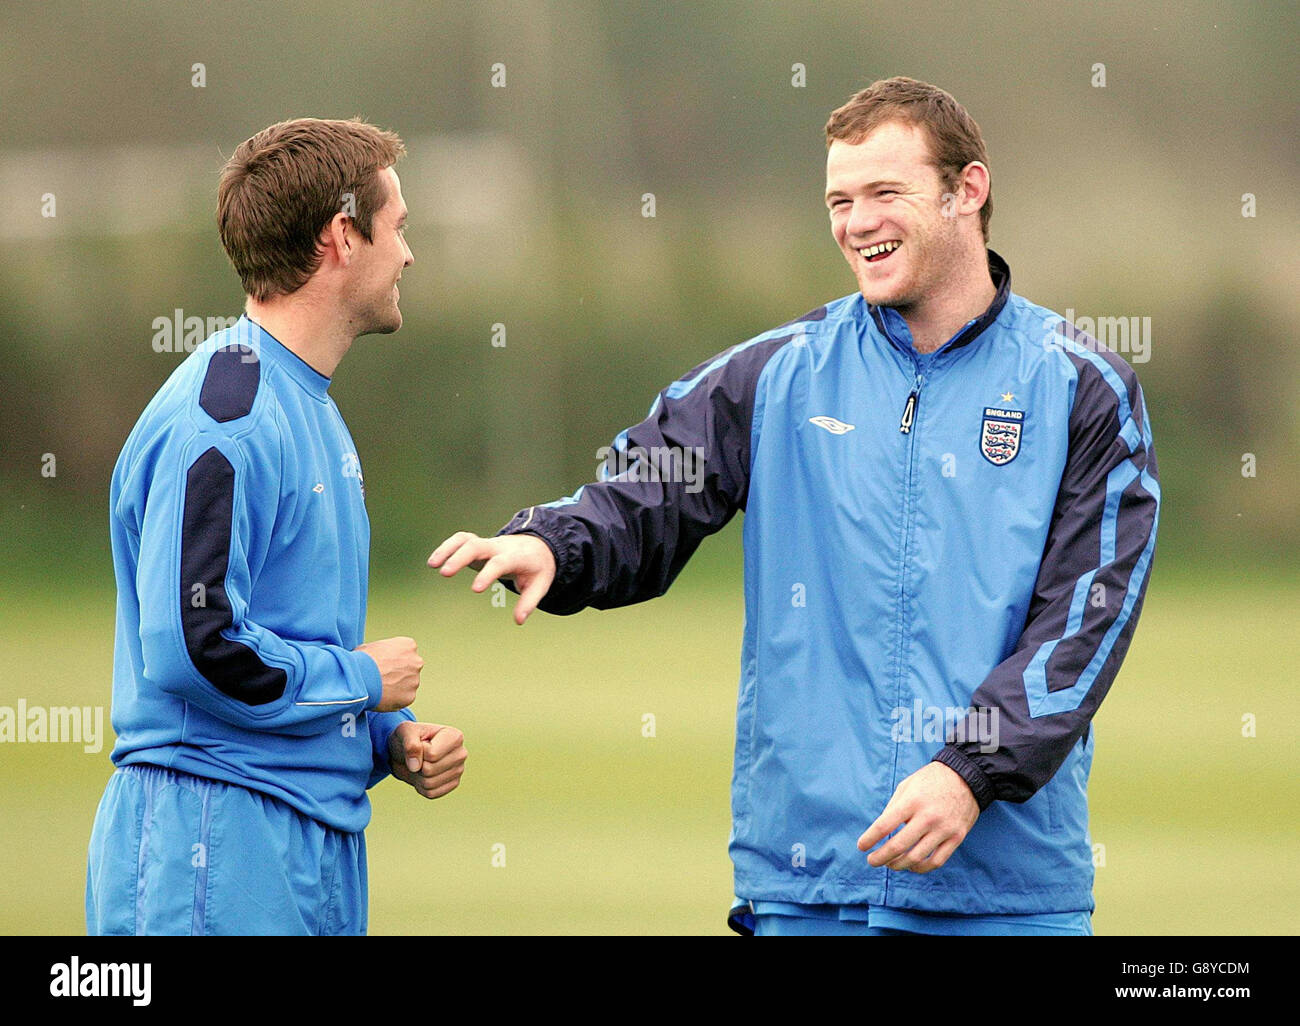 England's Michael Owen (L) and Wayne Rooney during a training session at Carrington, Manchester, Tuesday October 11, 2005, ahead of their World Cup qualifying match against Poland tomorrow evening. PRESS ASSOCIATION Photo. Photo credit should read: Martin Rickett/PA. Stock Photo